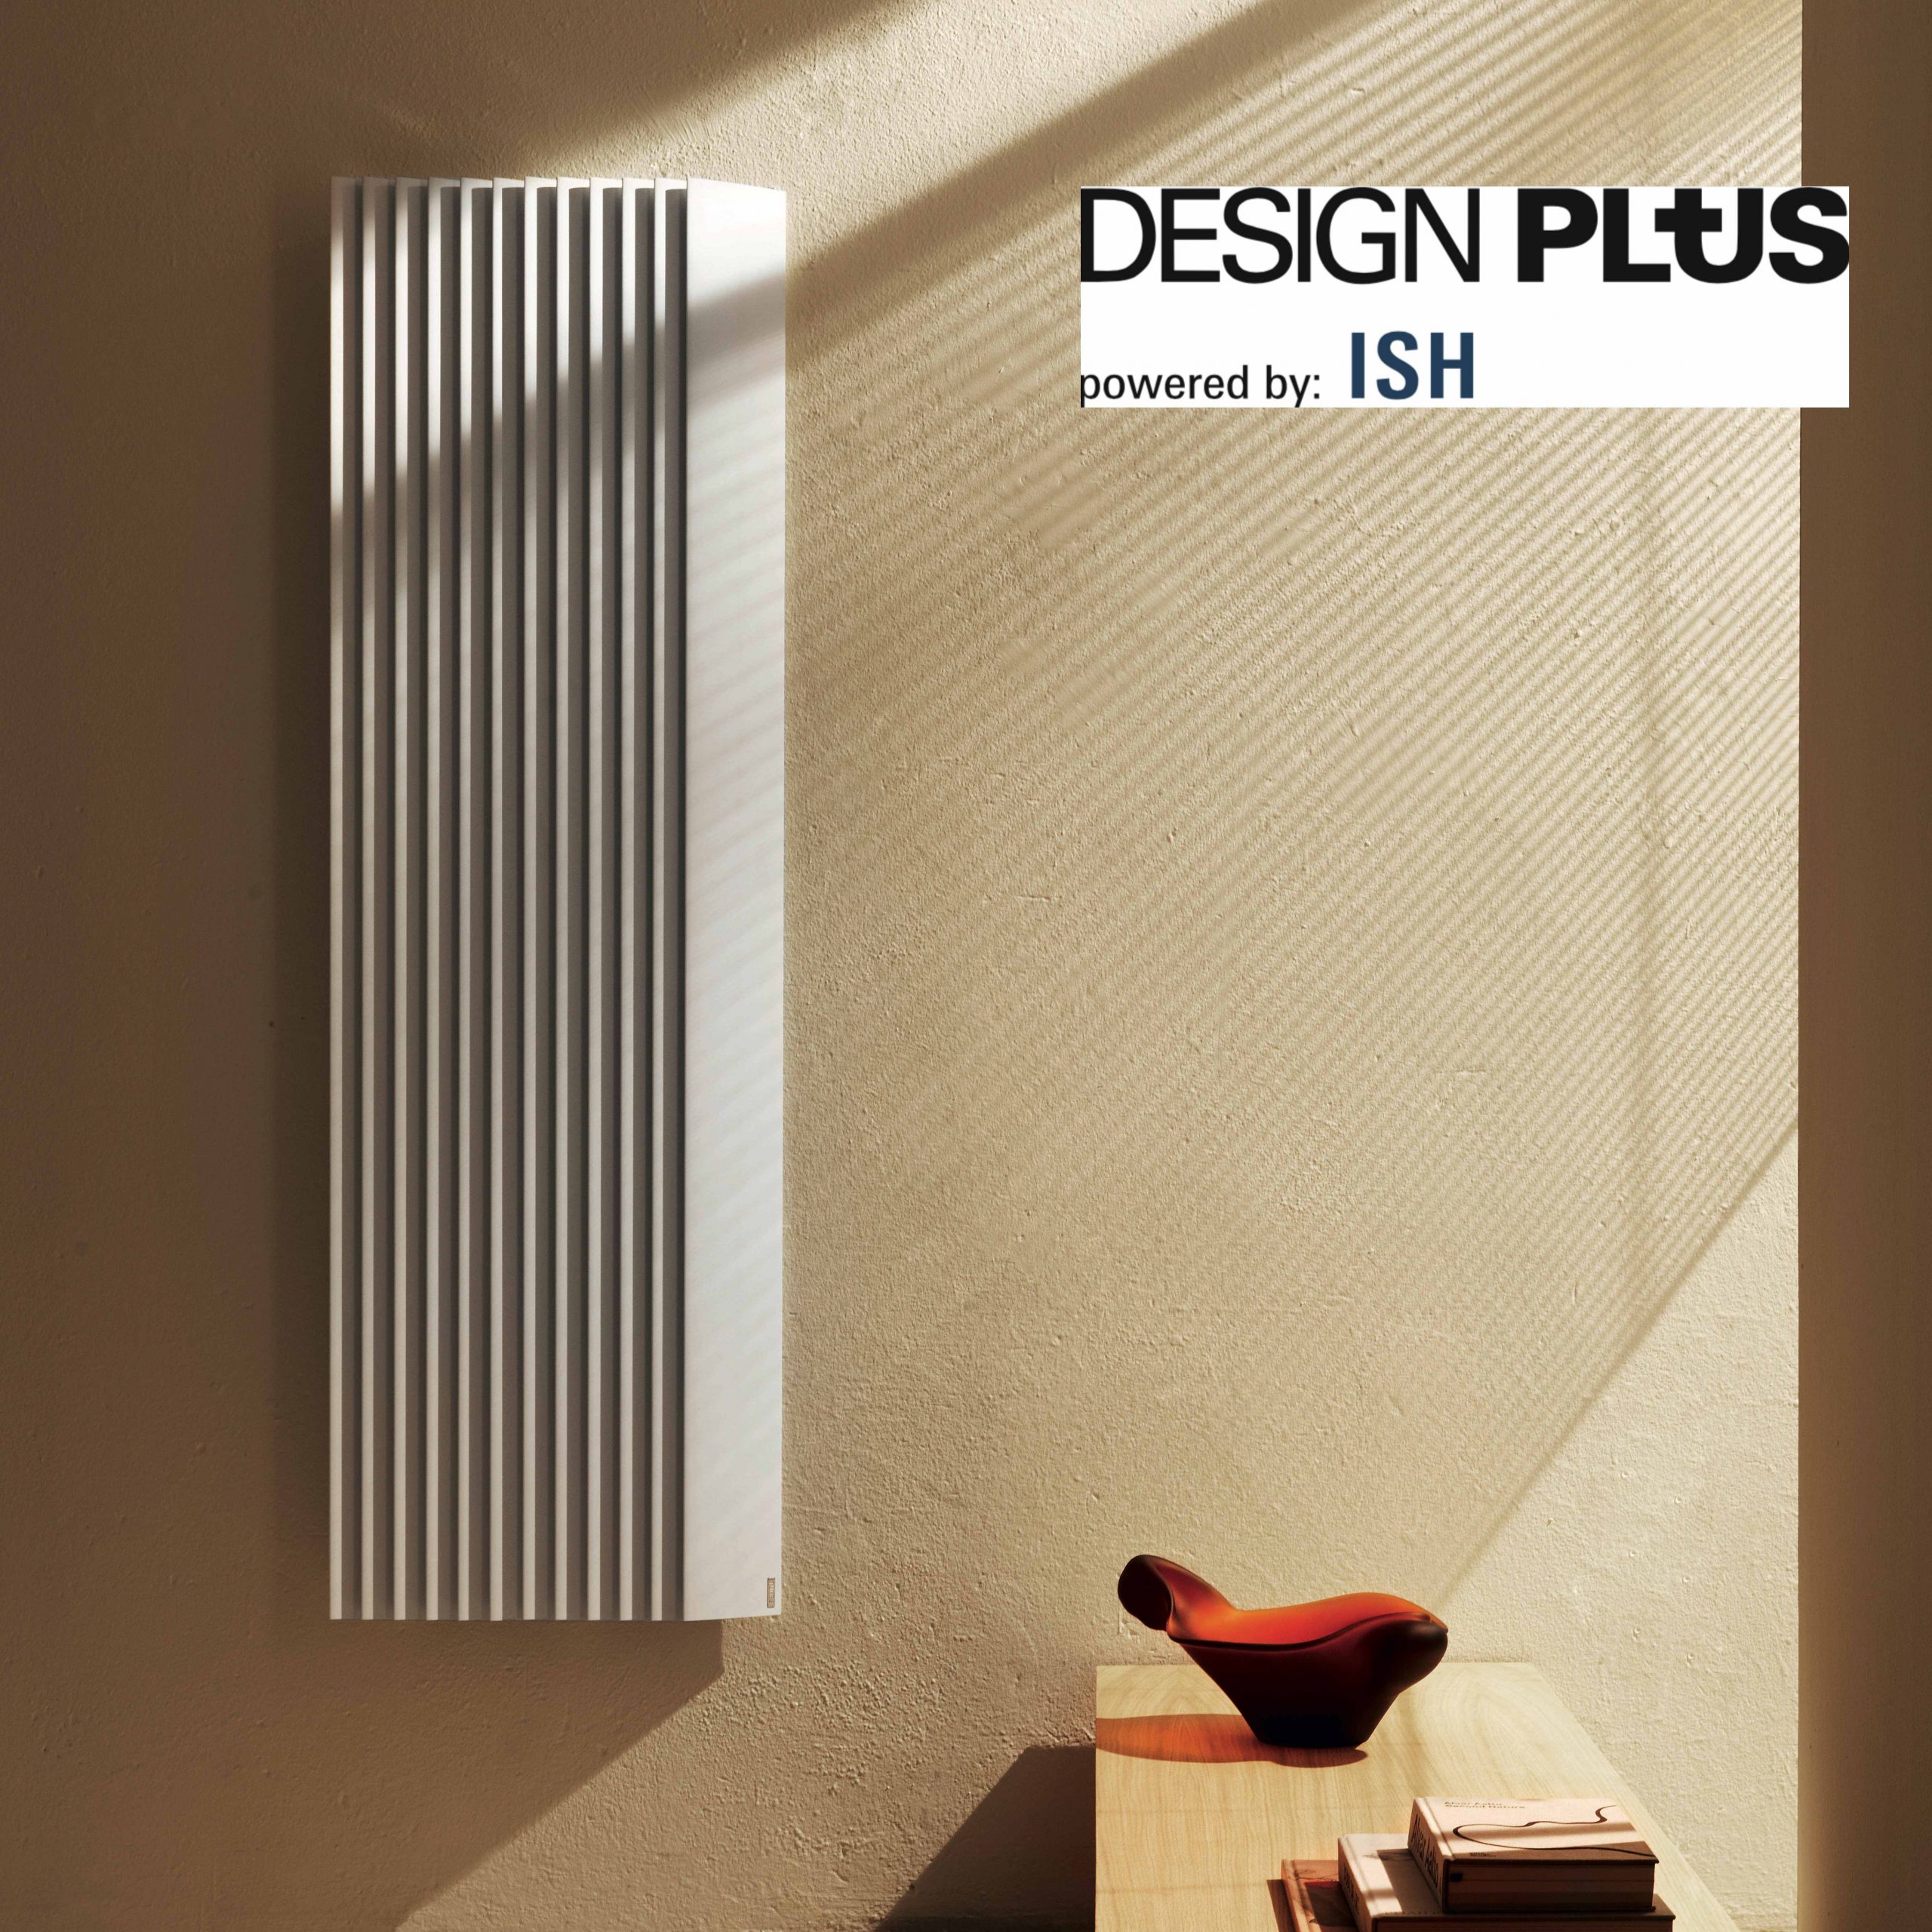 Step-by-Step remporte le prix Design Plus powered by ISH 2019